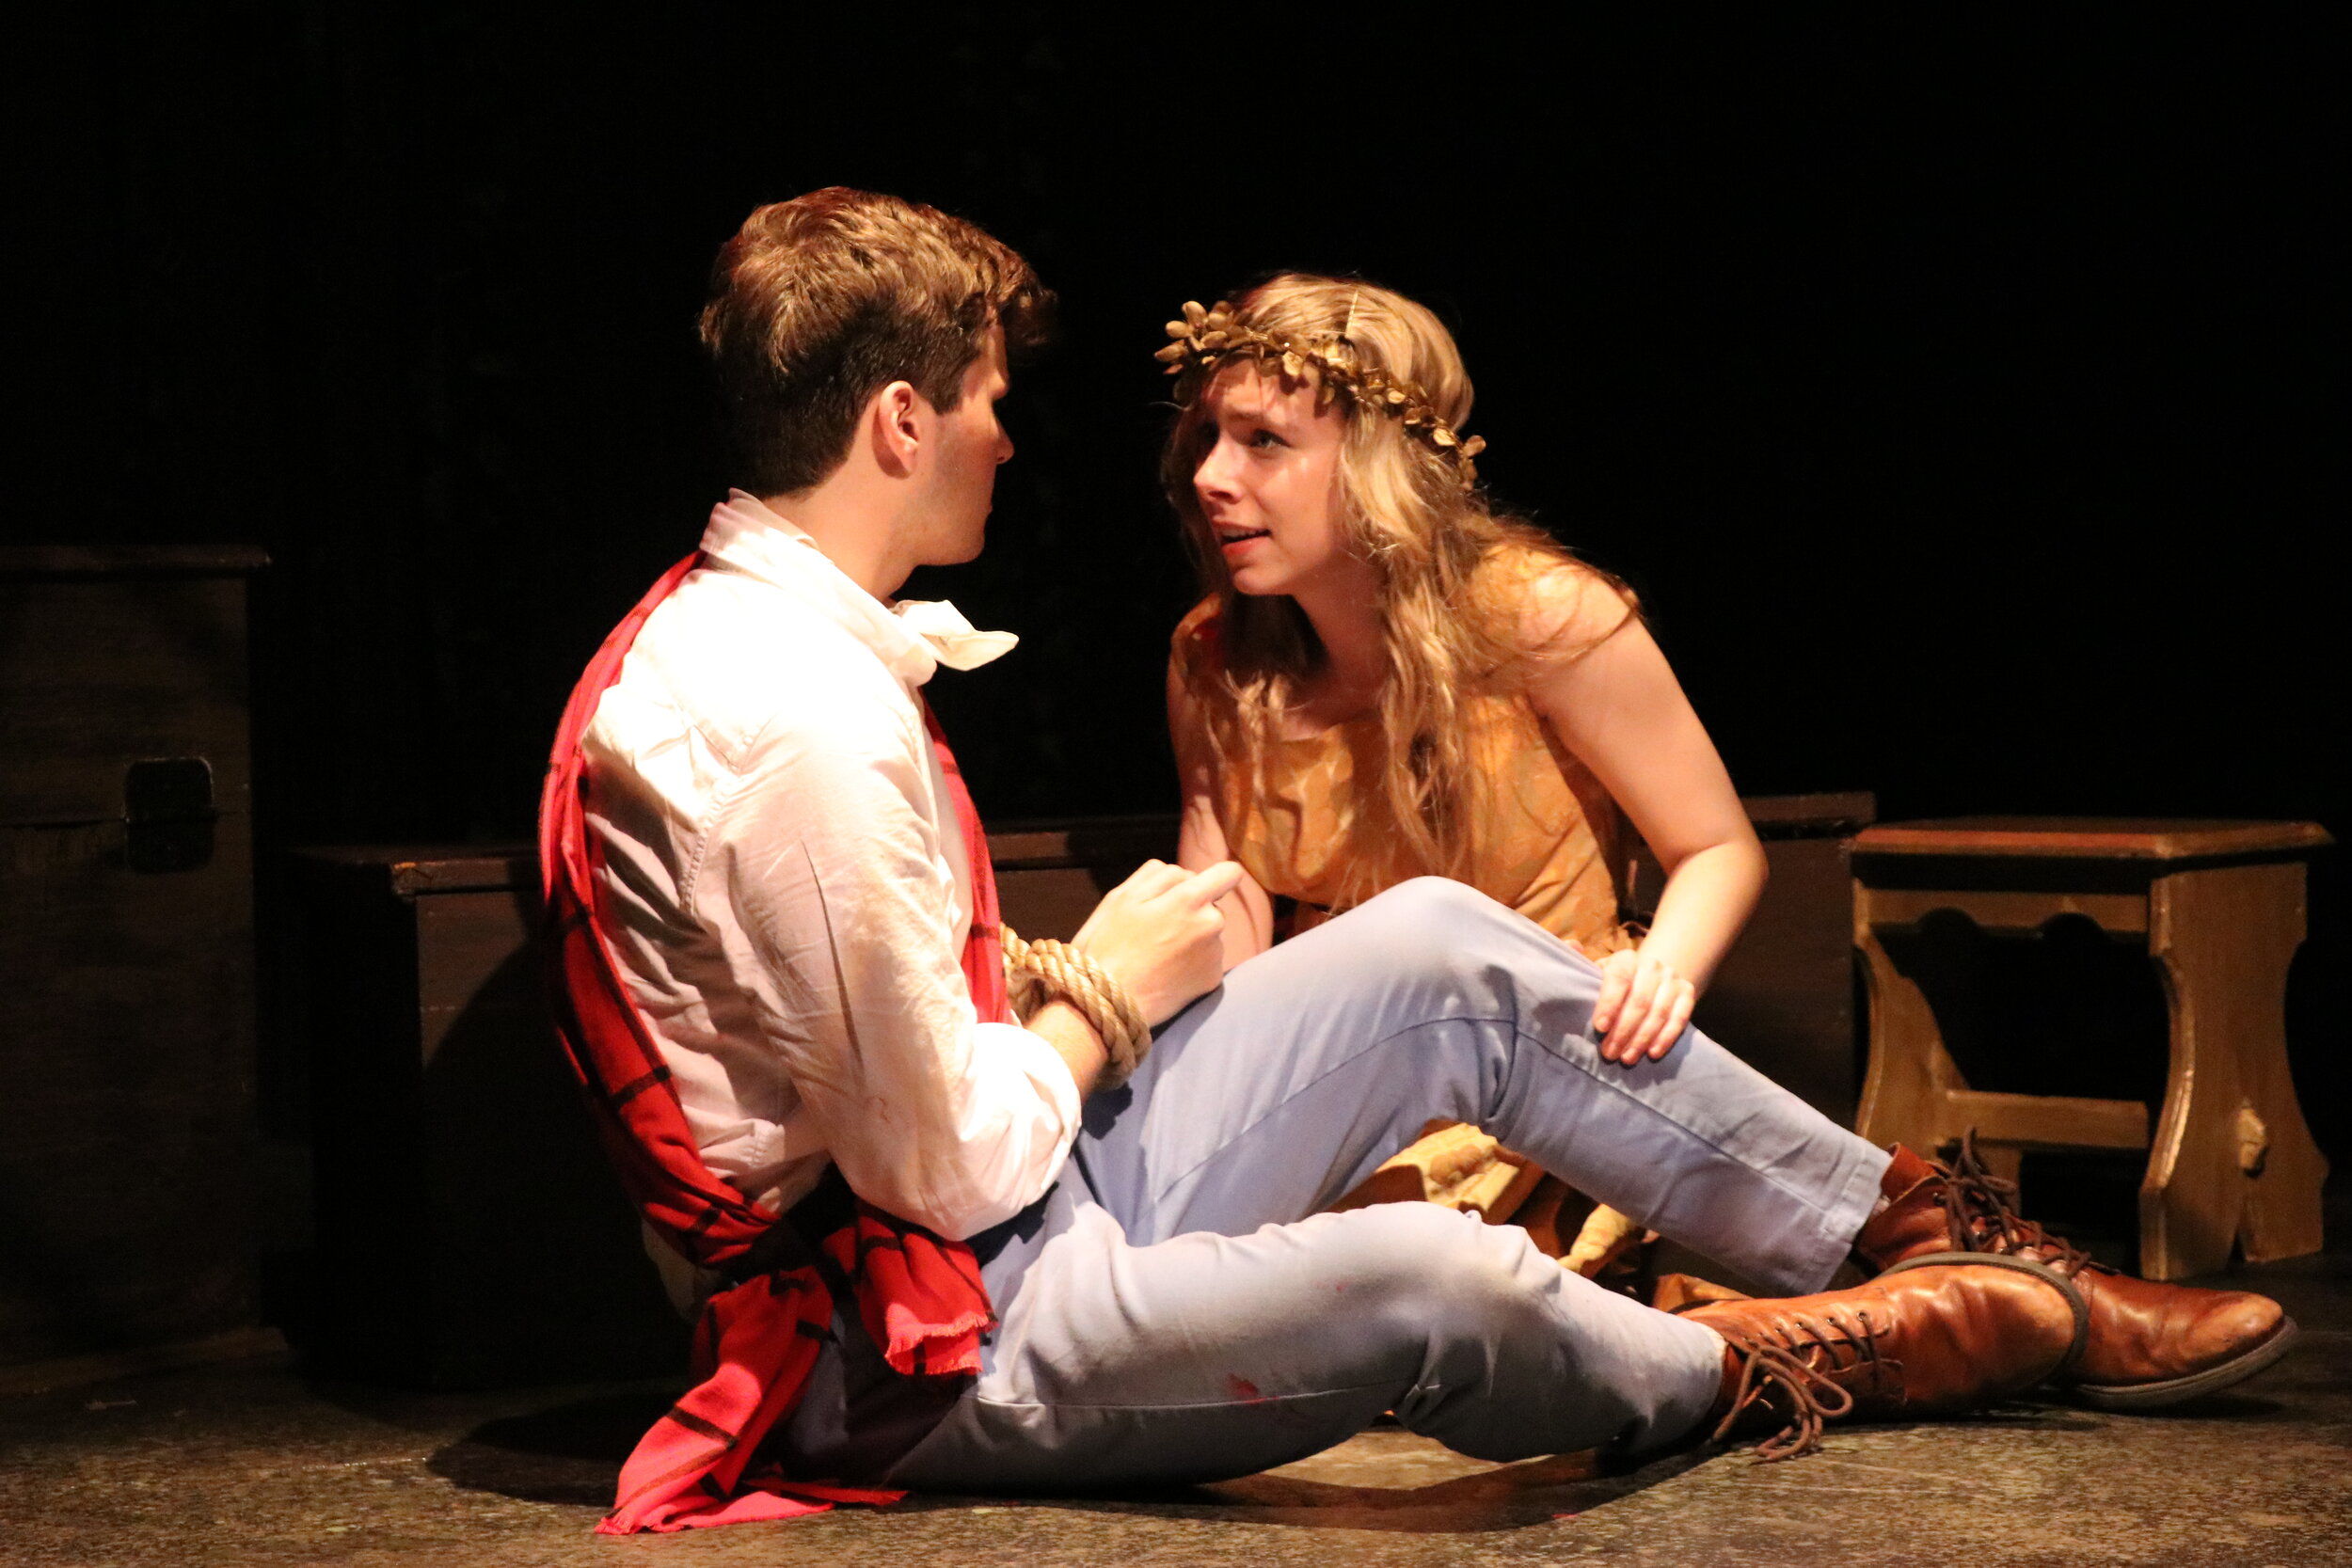  Tyler McMahon as Posthumus and Emily Hentschel as Imogen in CYMBELINE, directed by Avital Shira. Photo by Mariel Weinand. 